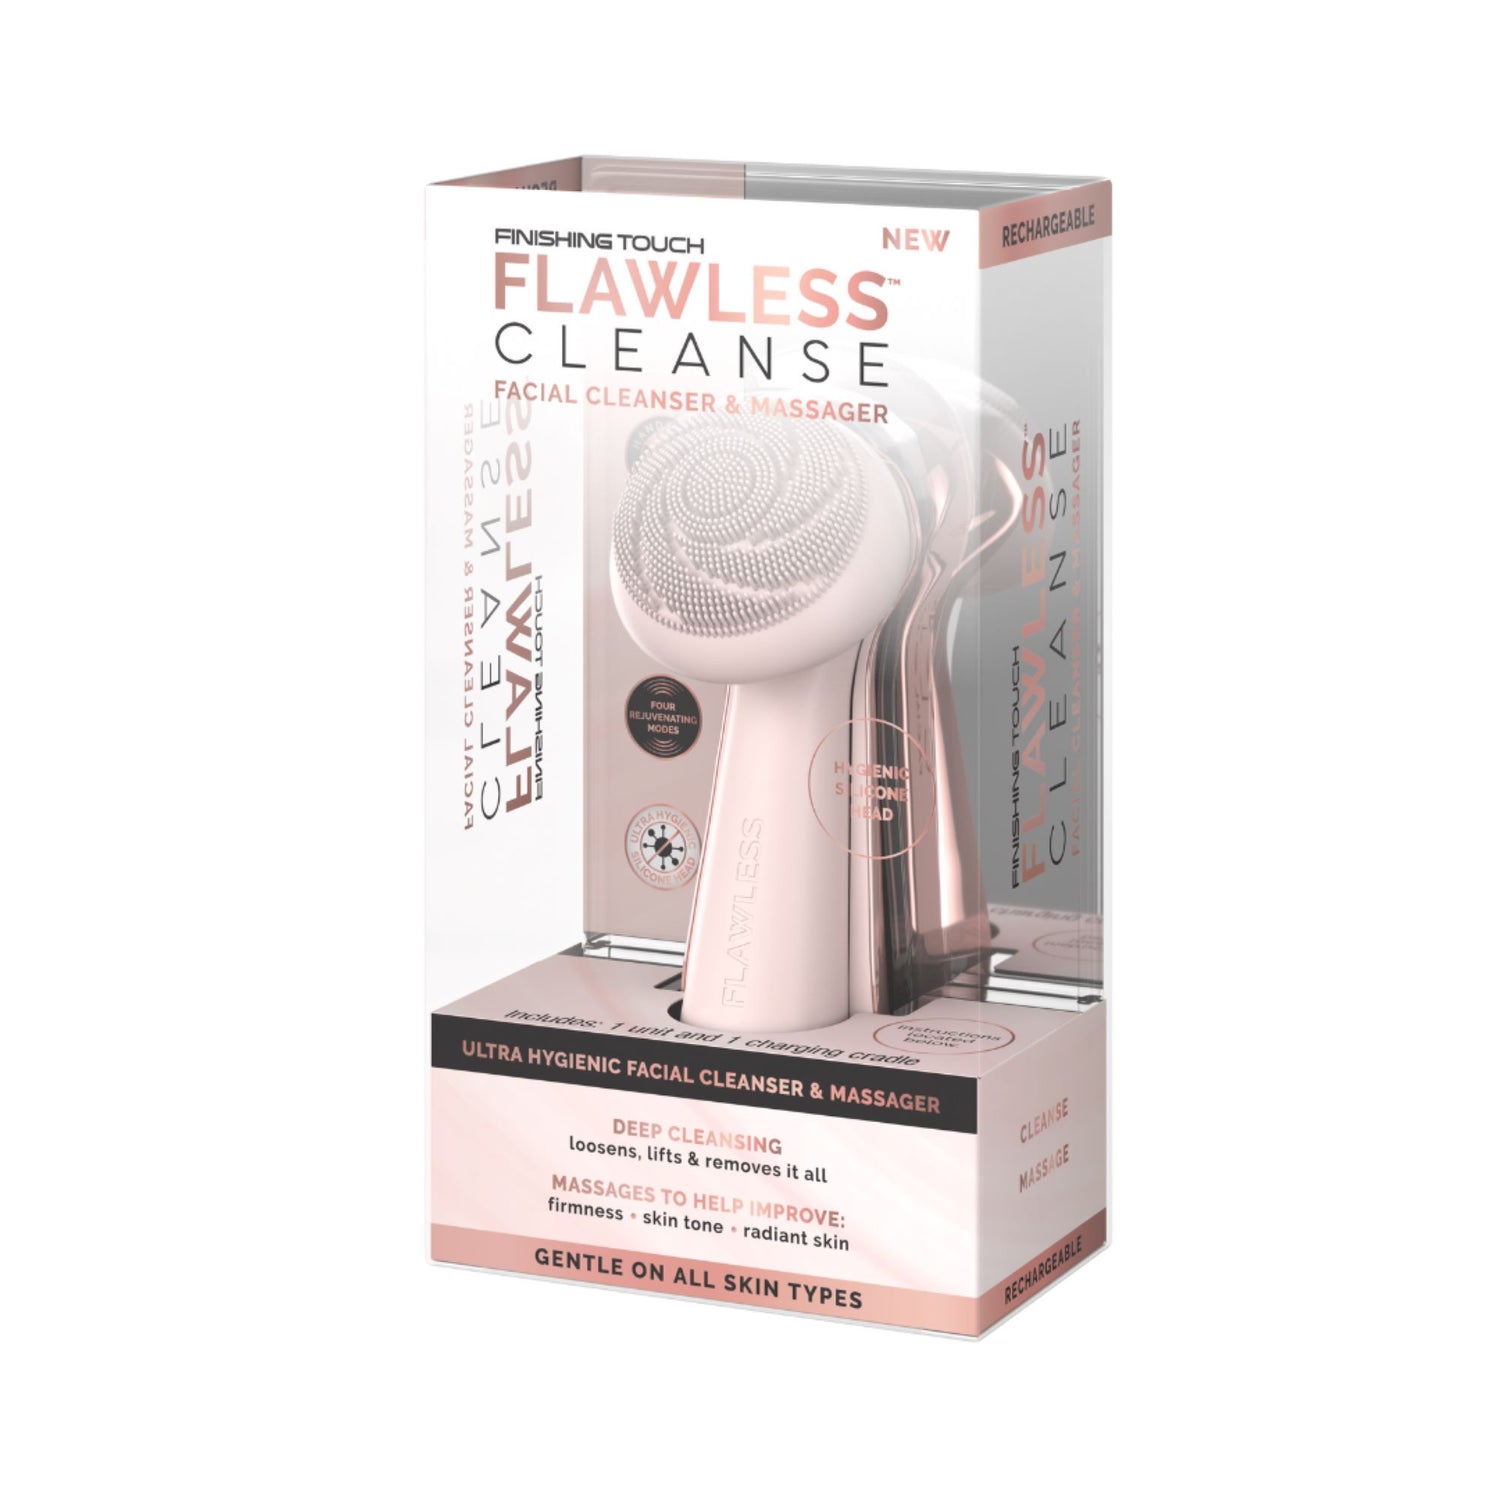 Finishing Touch Flawless Cleanse Facial Cleanser &amp; Massager